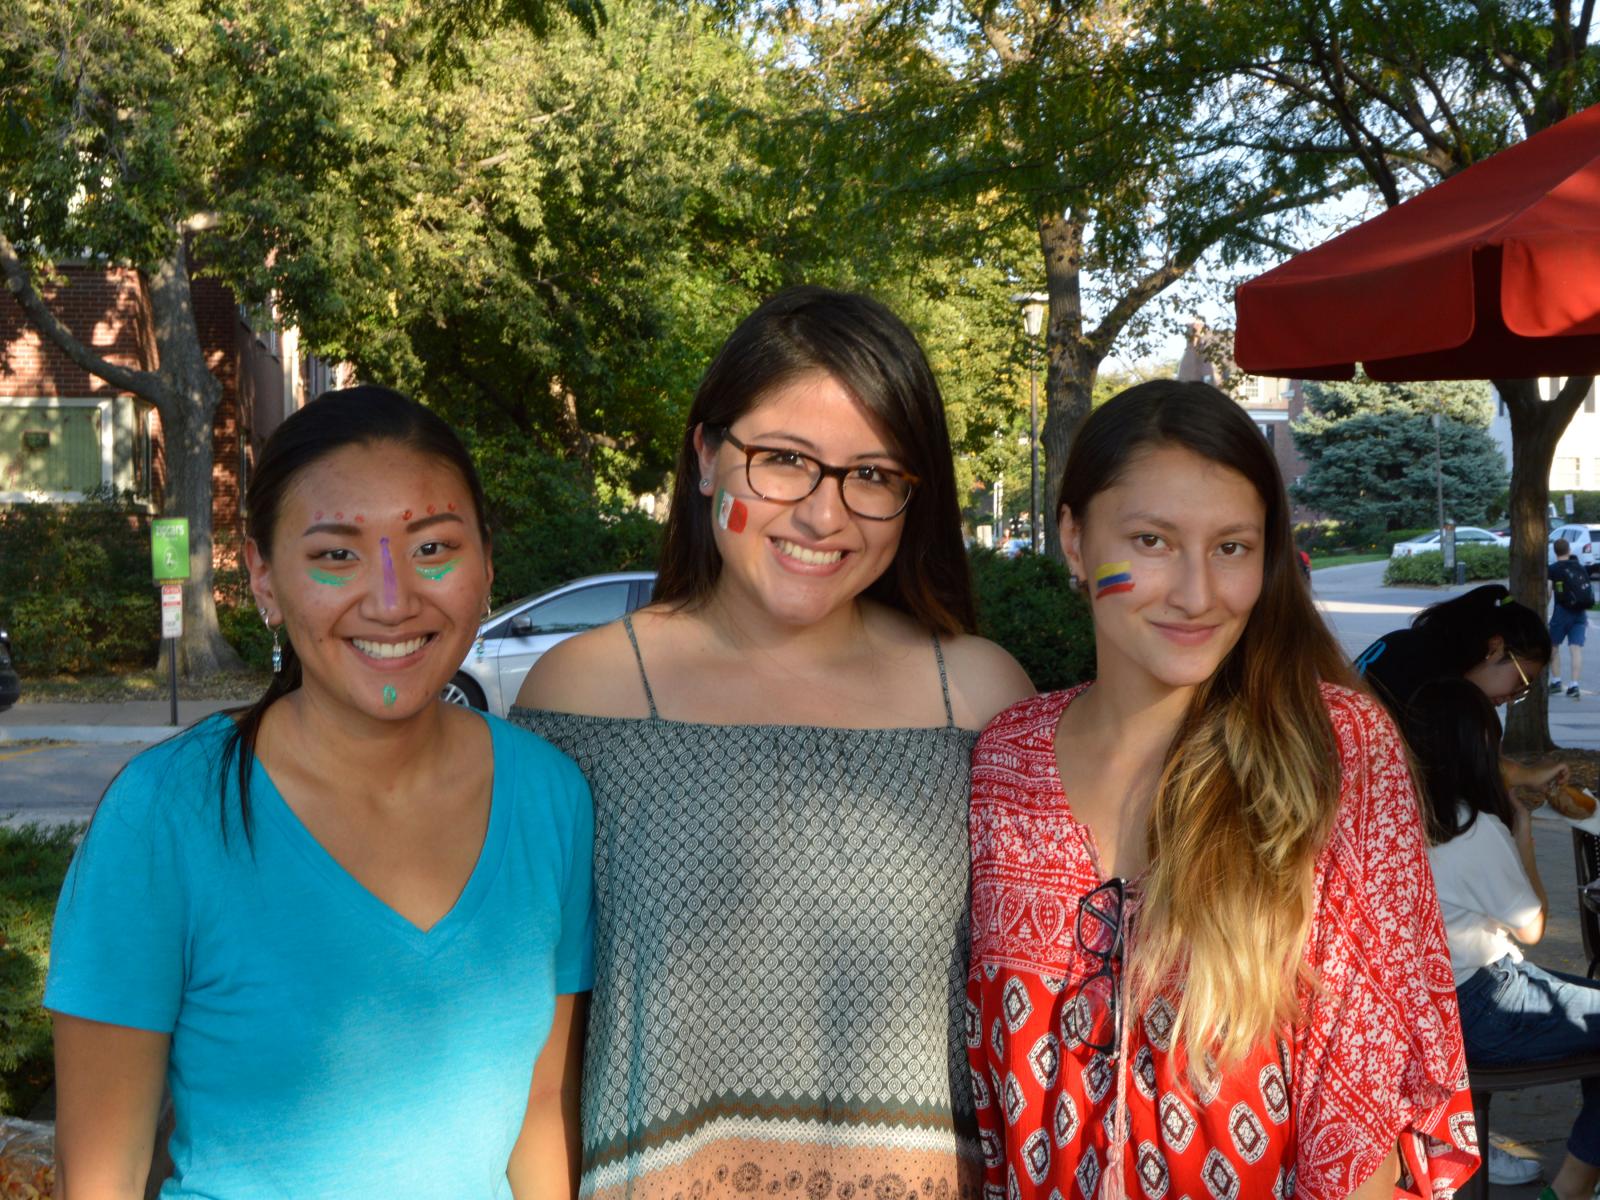 Students with facepaint celebrate Hispanic heritage at Fiesta on the Green at the University of Nebraska-Lincoln.